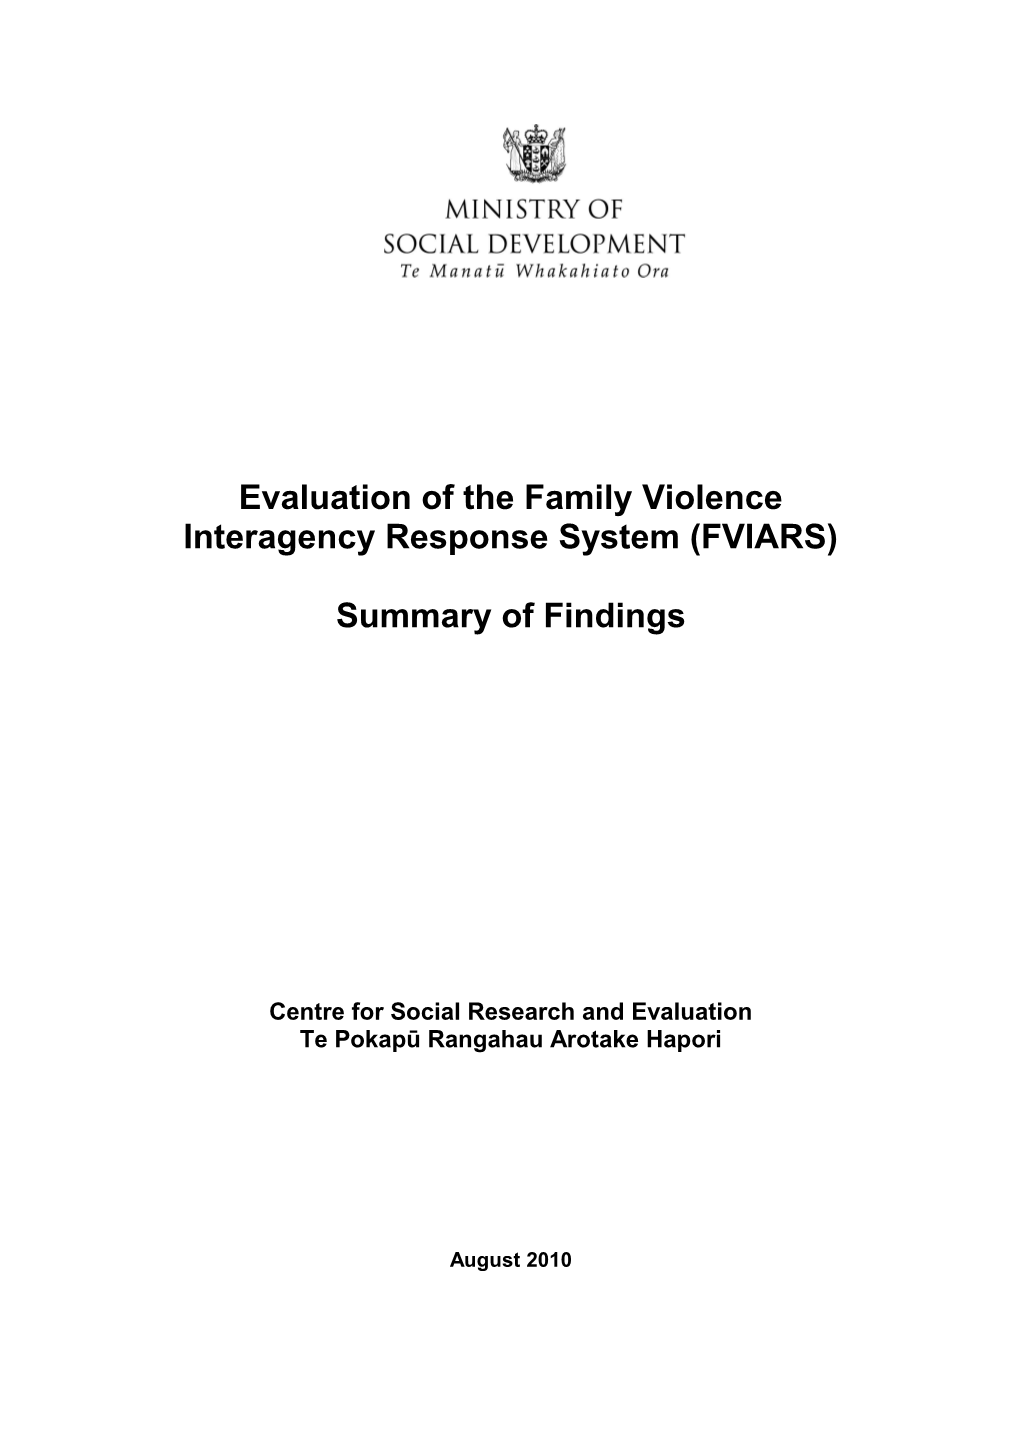 Evaluation of the Family Violence Interagency Response System (FVIARS)